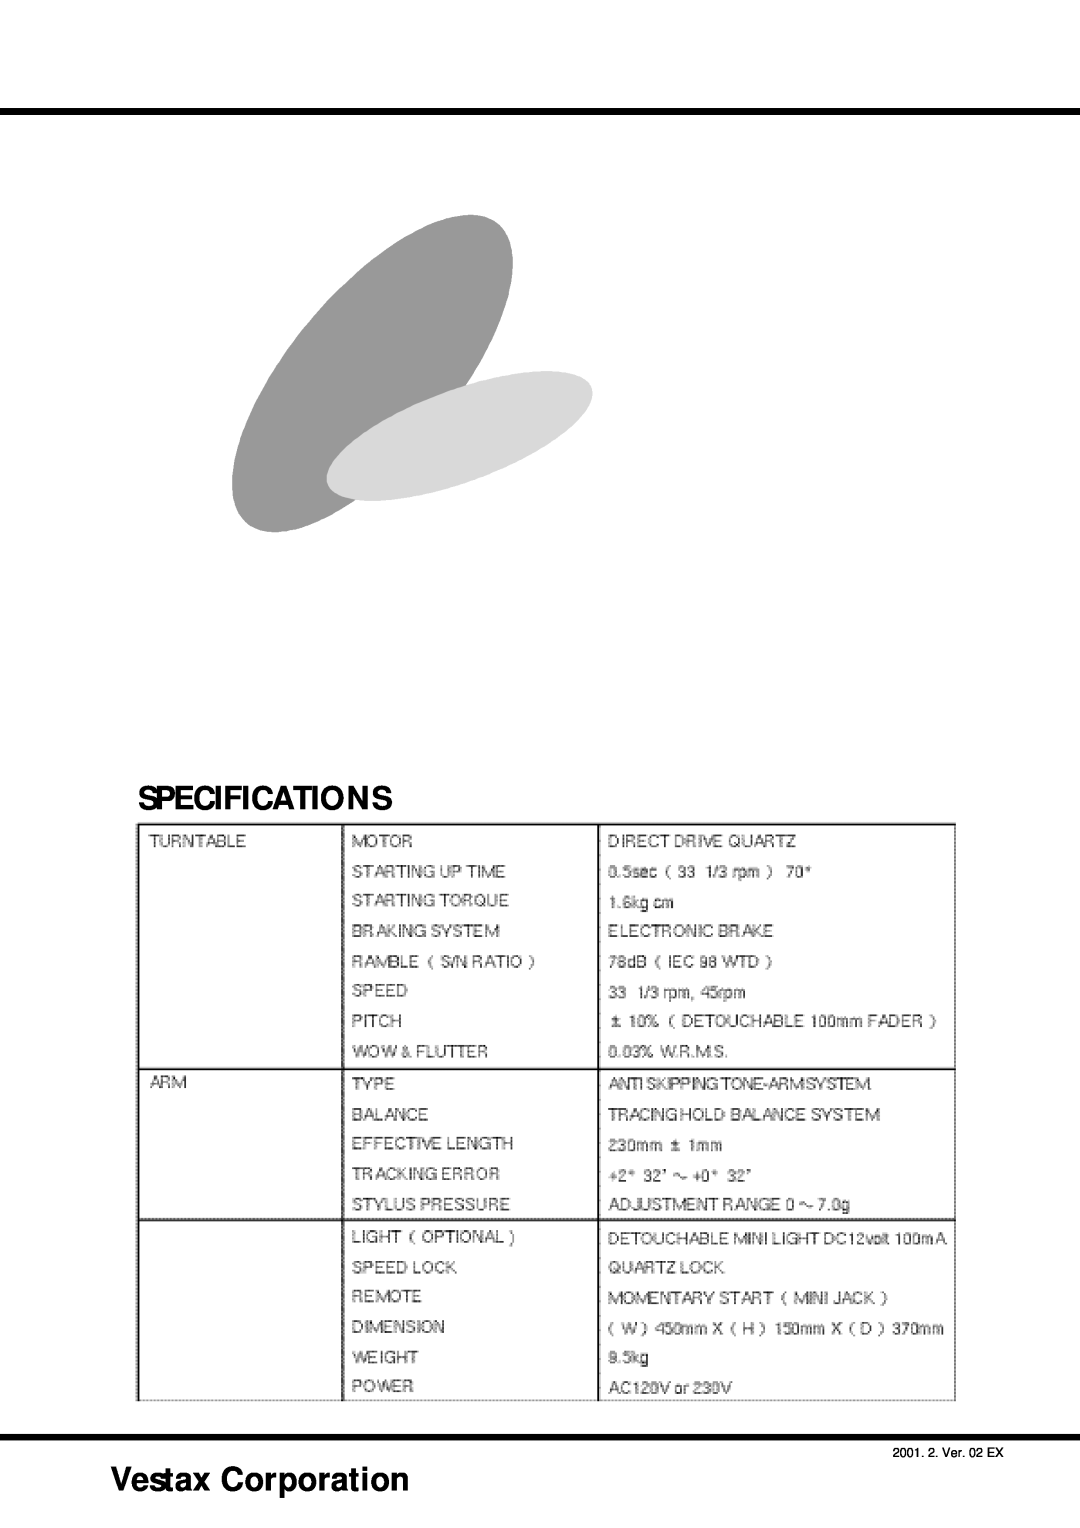 CK Electric Part PDX-8000 owner manual Vestax Corporation, Specifications, 2001. 2. Ver. 02 EX 